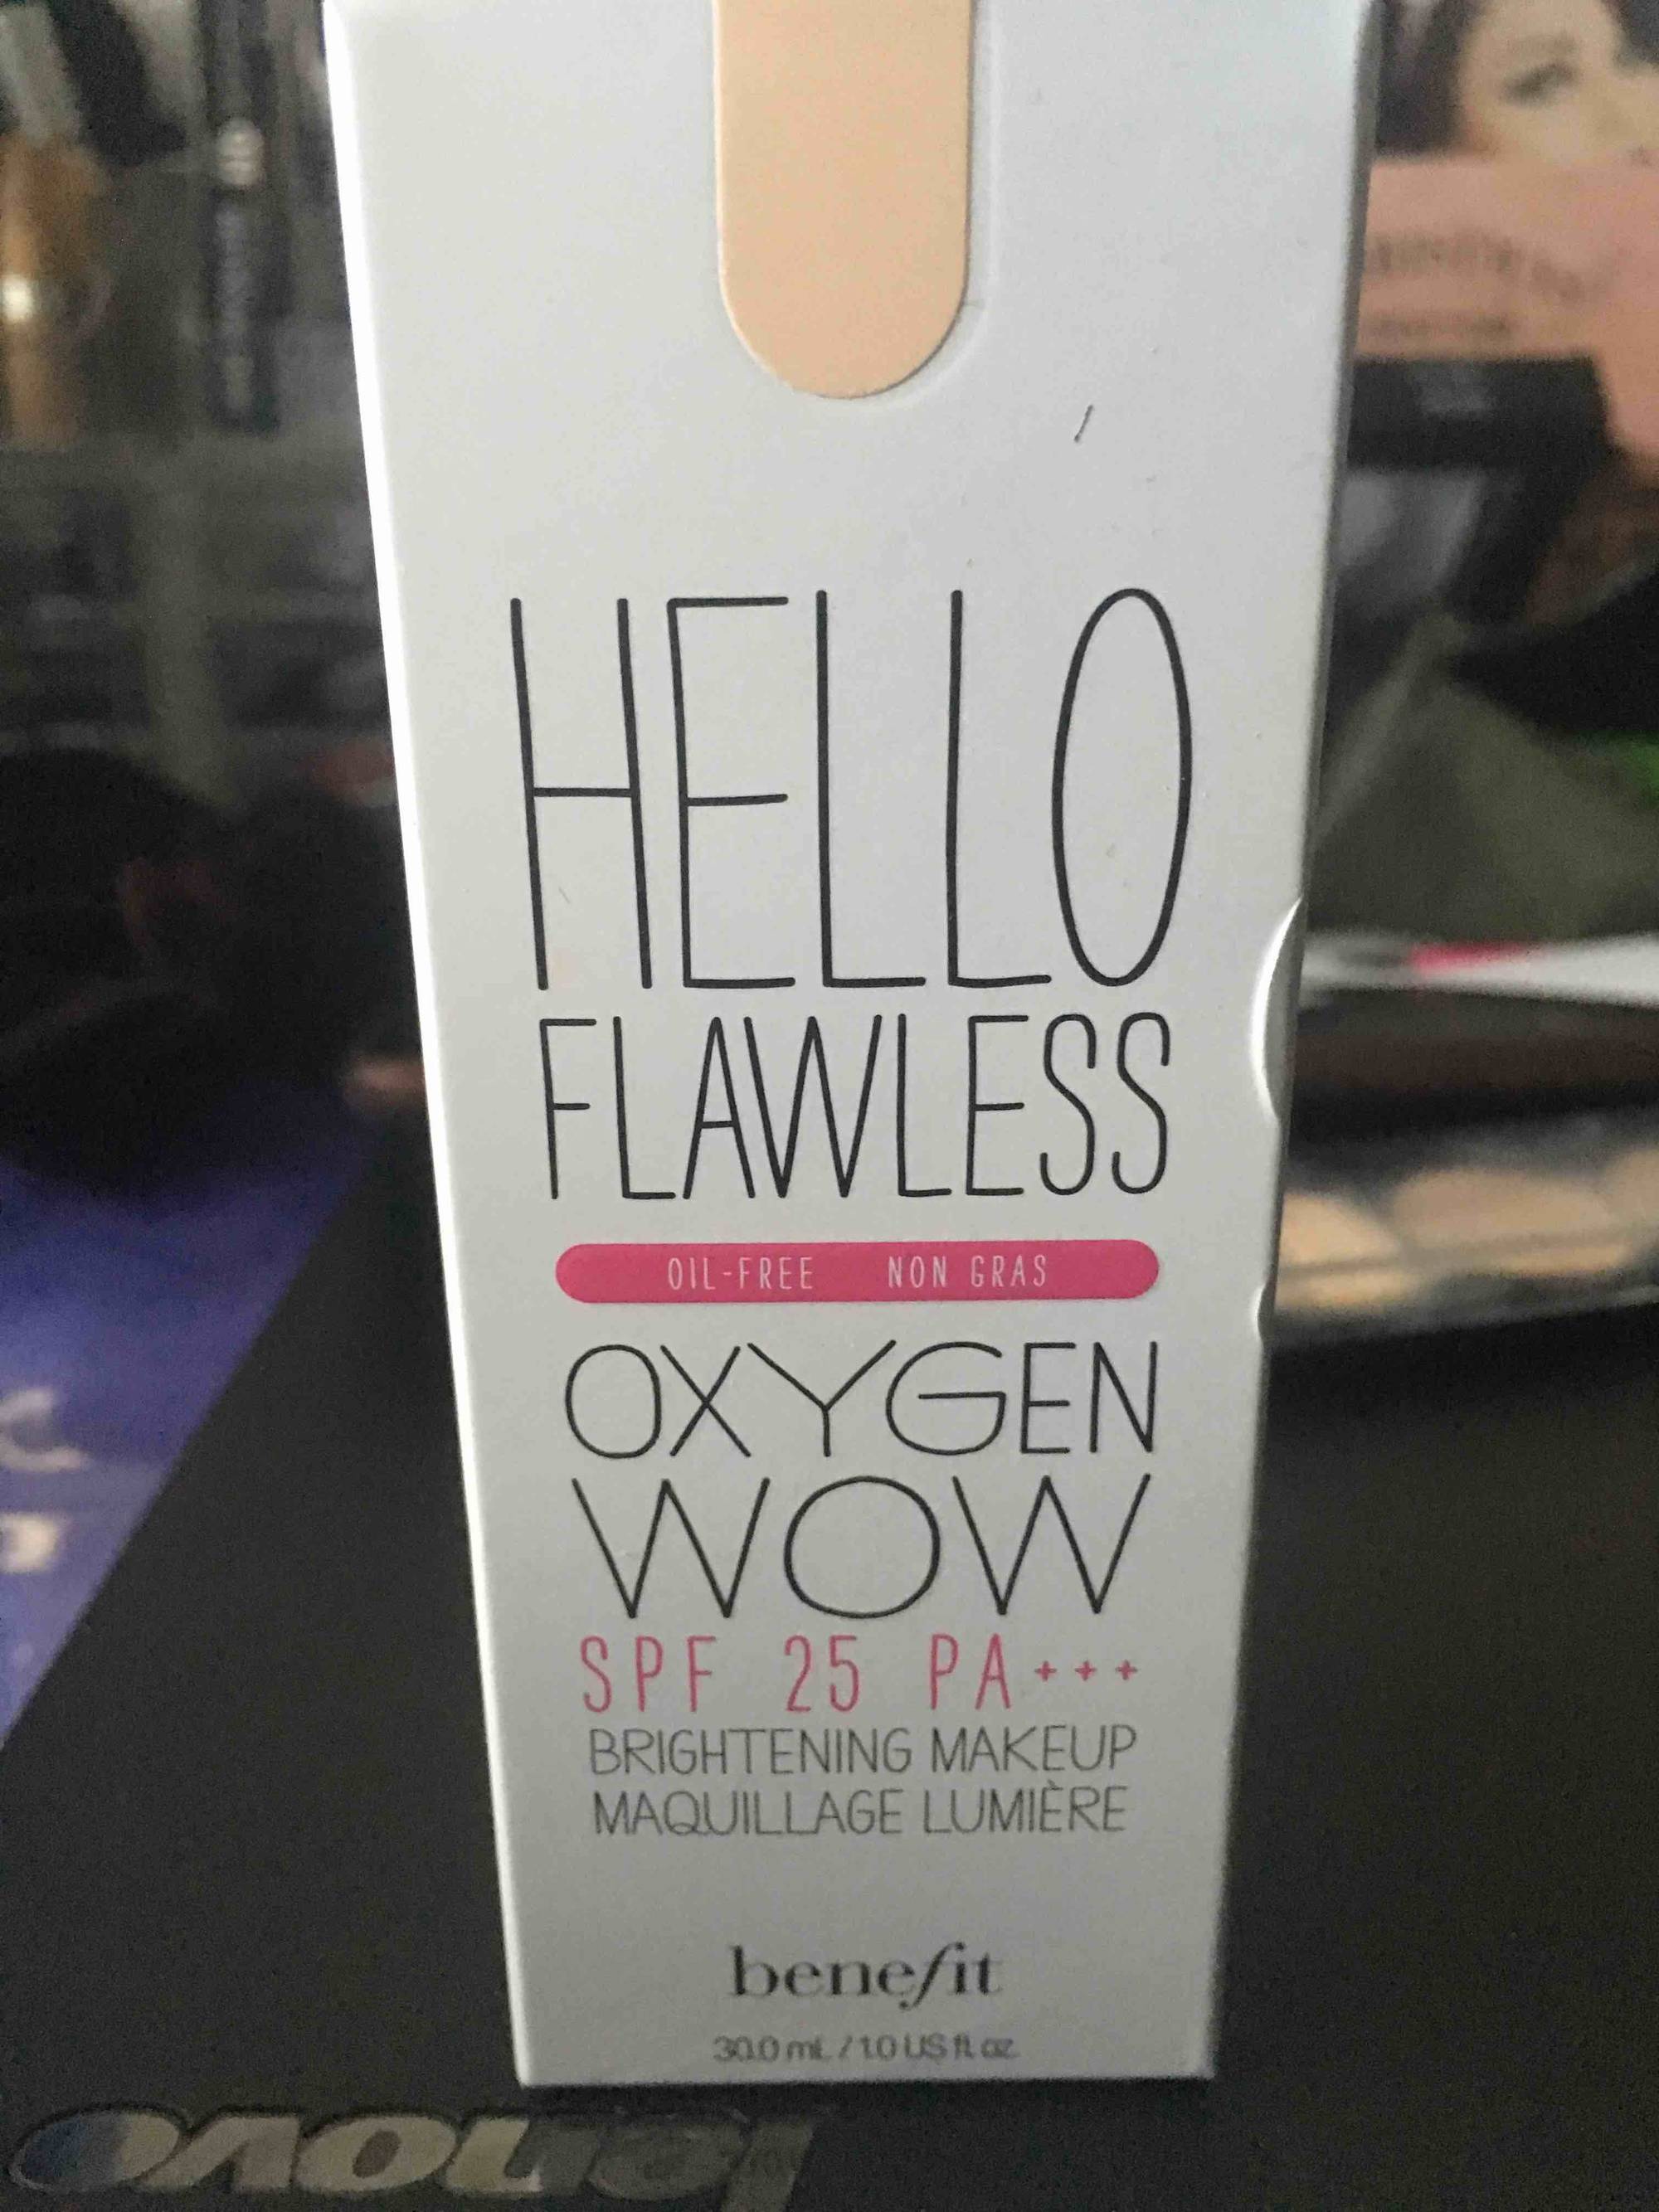 BENEFIT - Hello flawless oxygen wow - Maquillage lumière